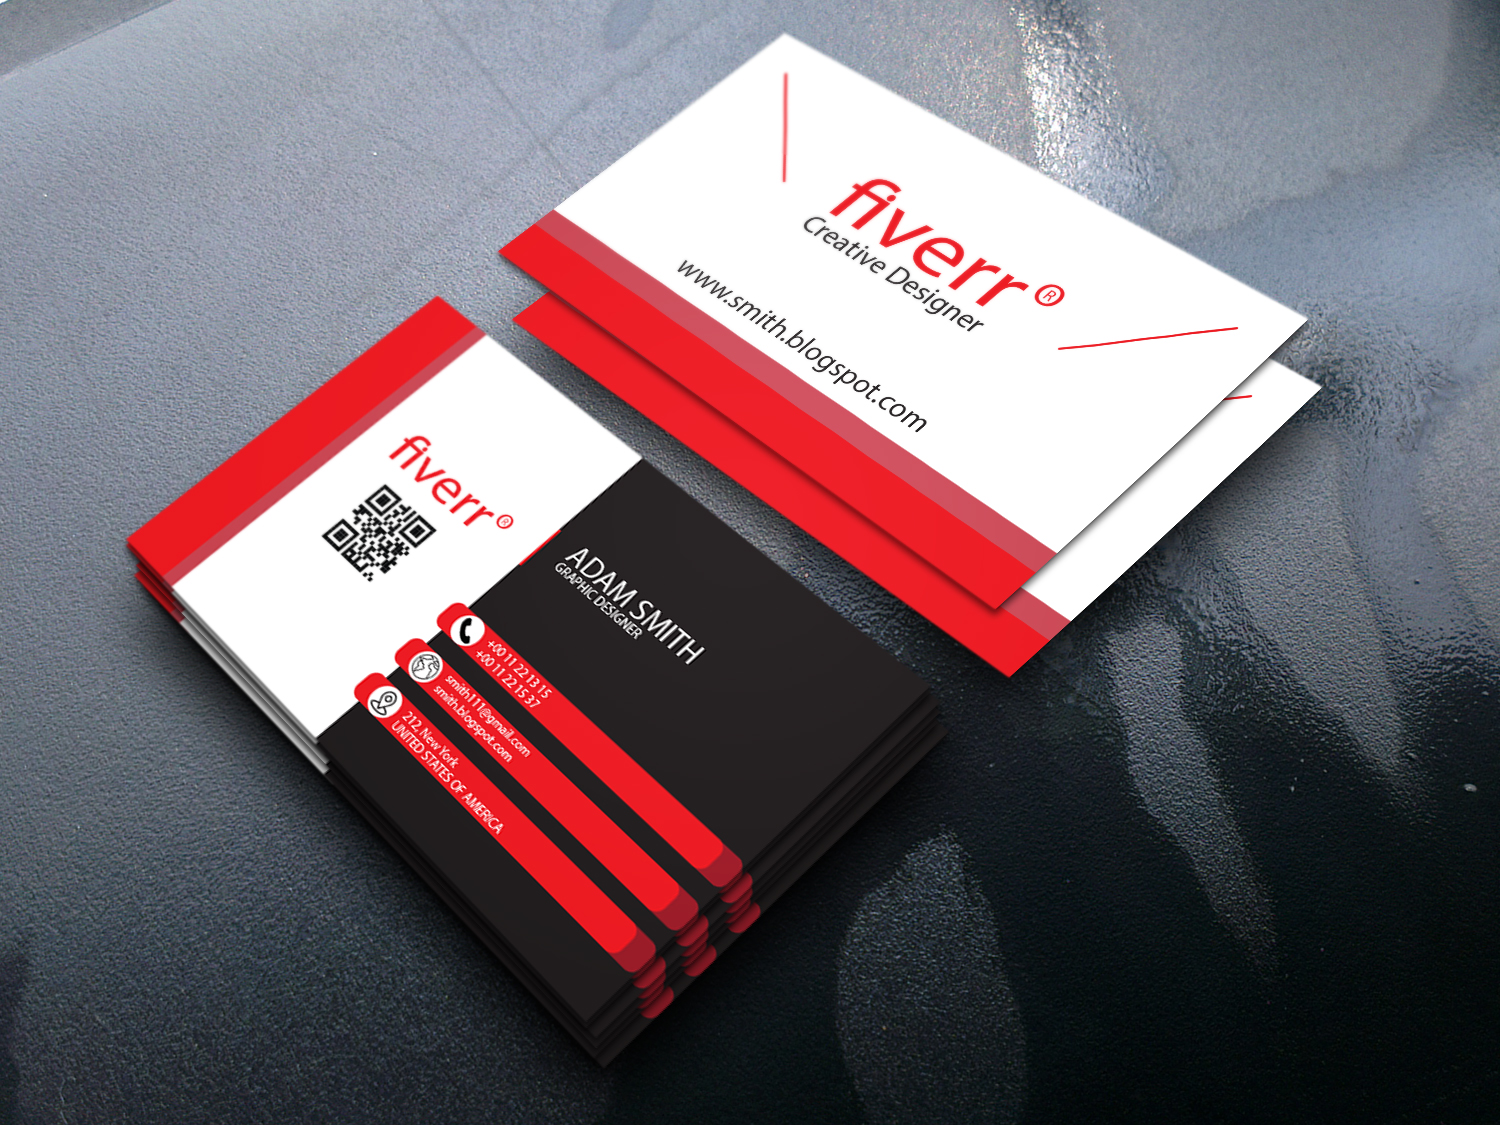 11440I will design a professional business card in 24 hrs